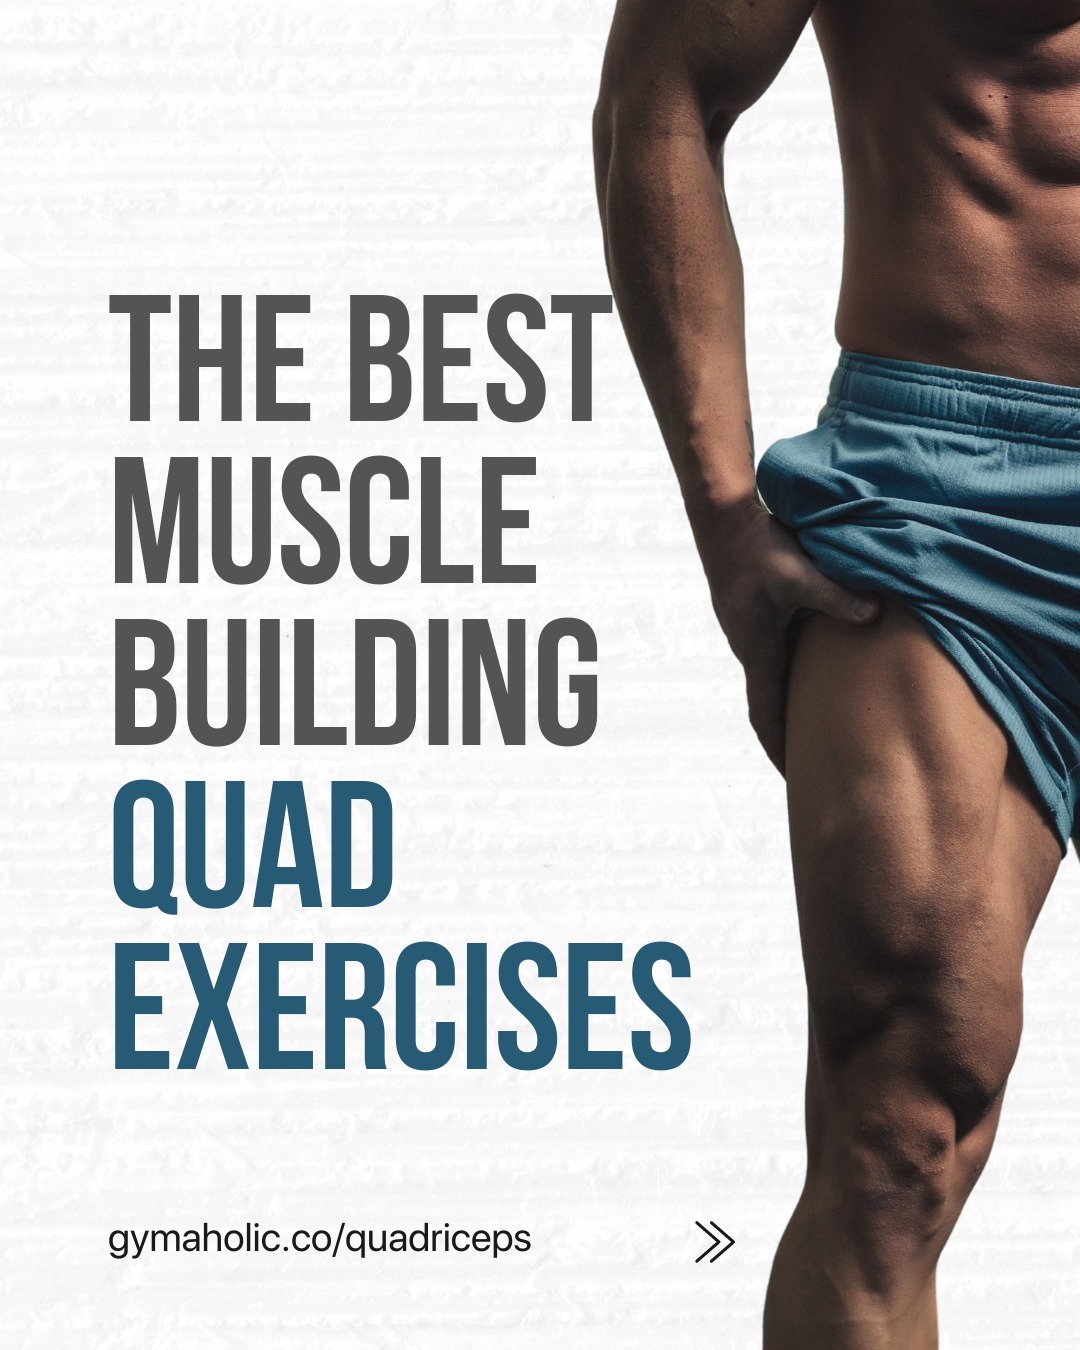 The Best Muscle Building Quad Exercises